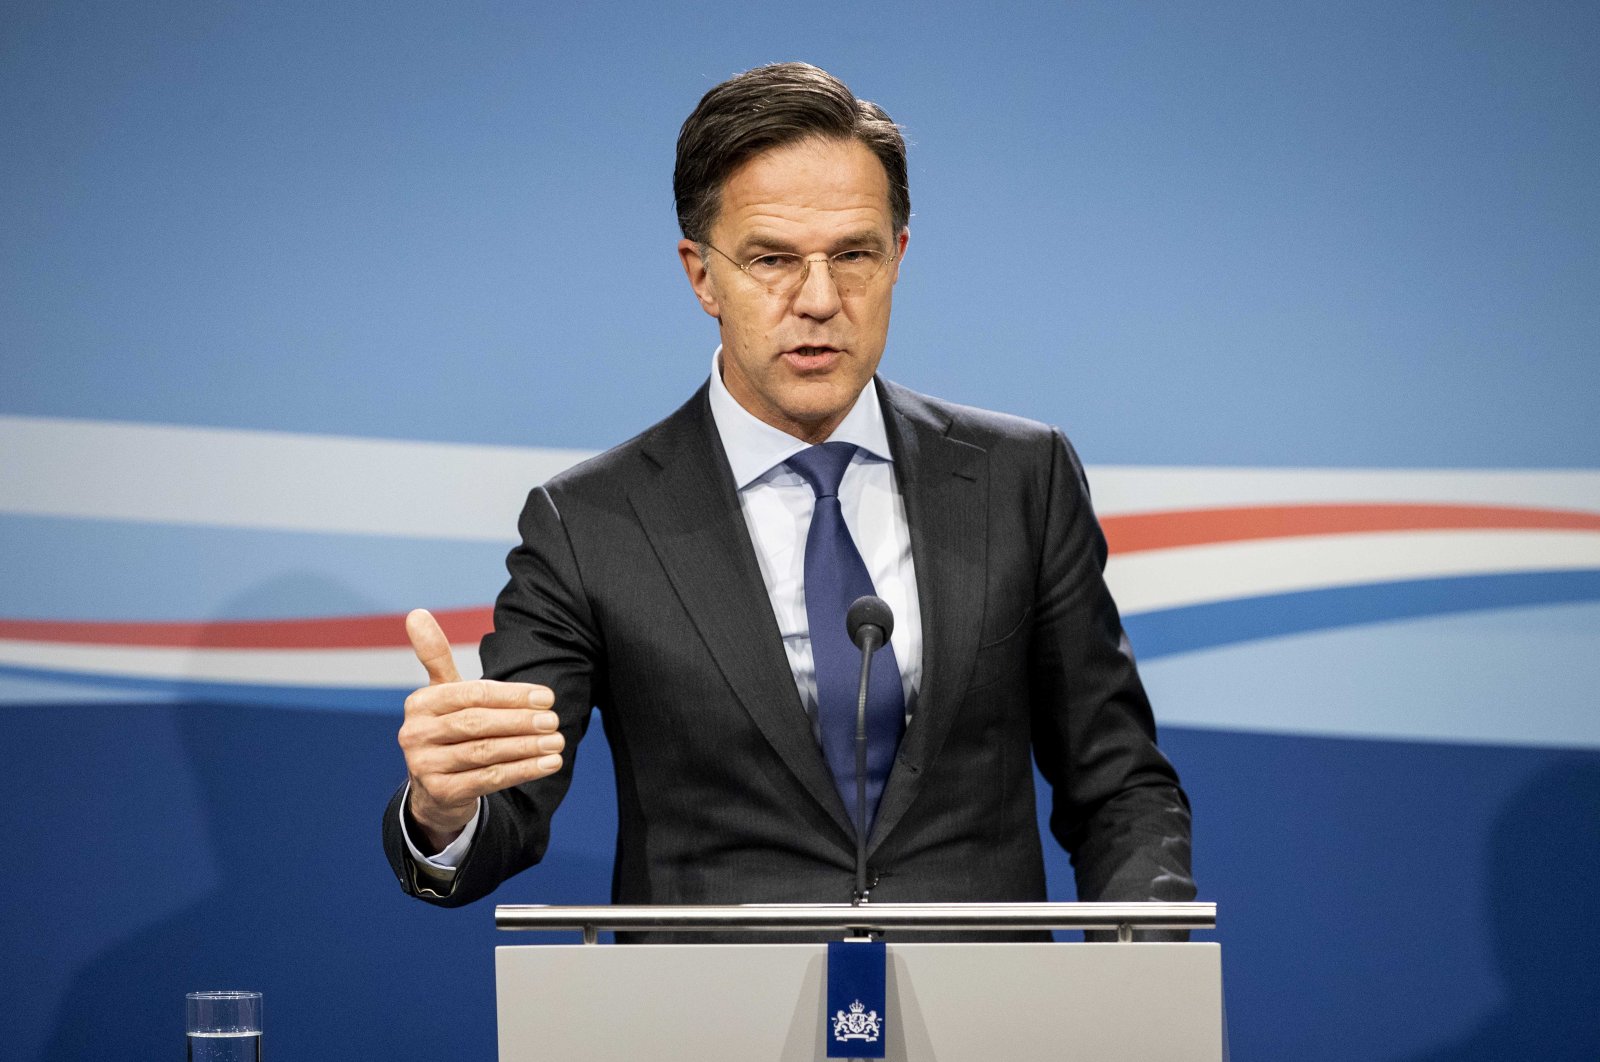 Dutch Prime Minister Mark Rutte speaks during the press conference after the weekly Council of Ministers in the Hague, the Netherlands, March 18, 2022. (EPA Photo)